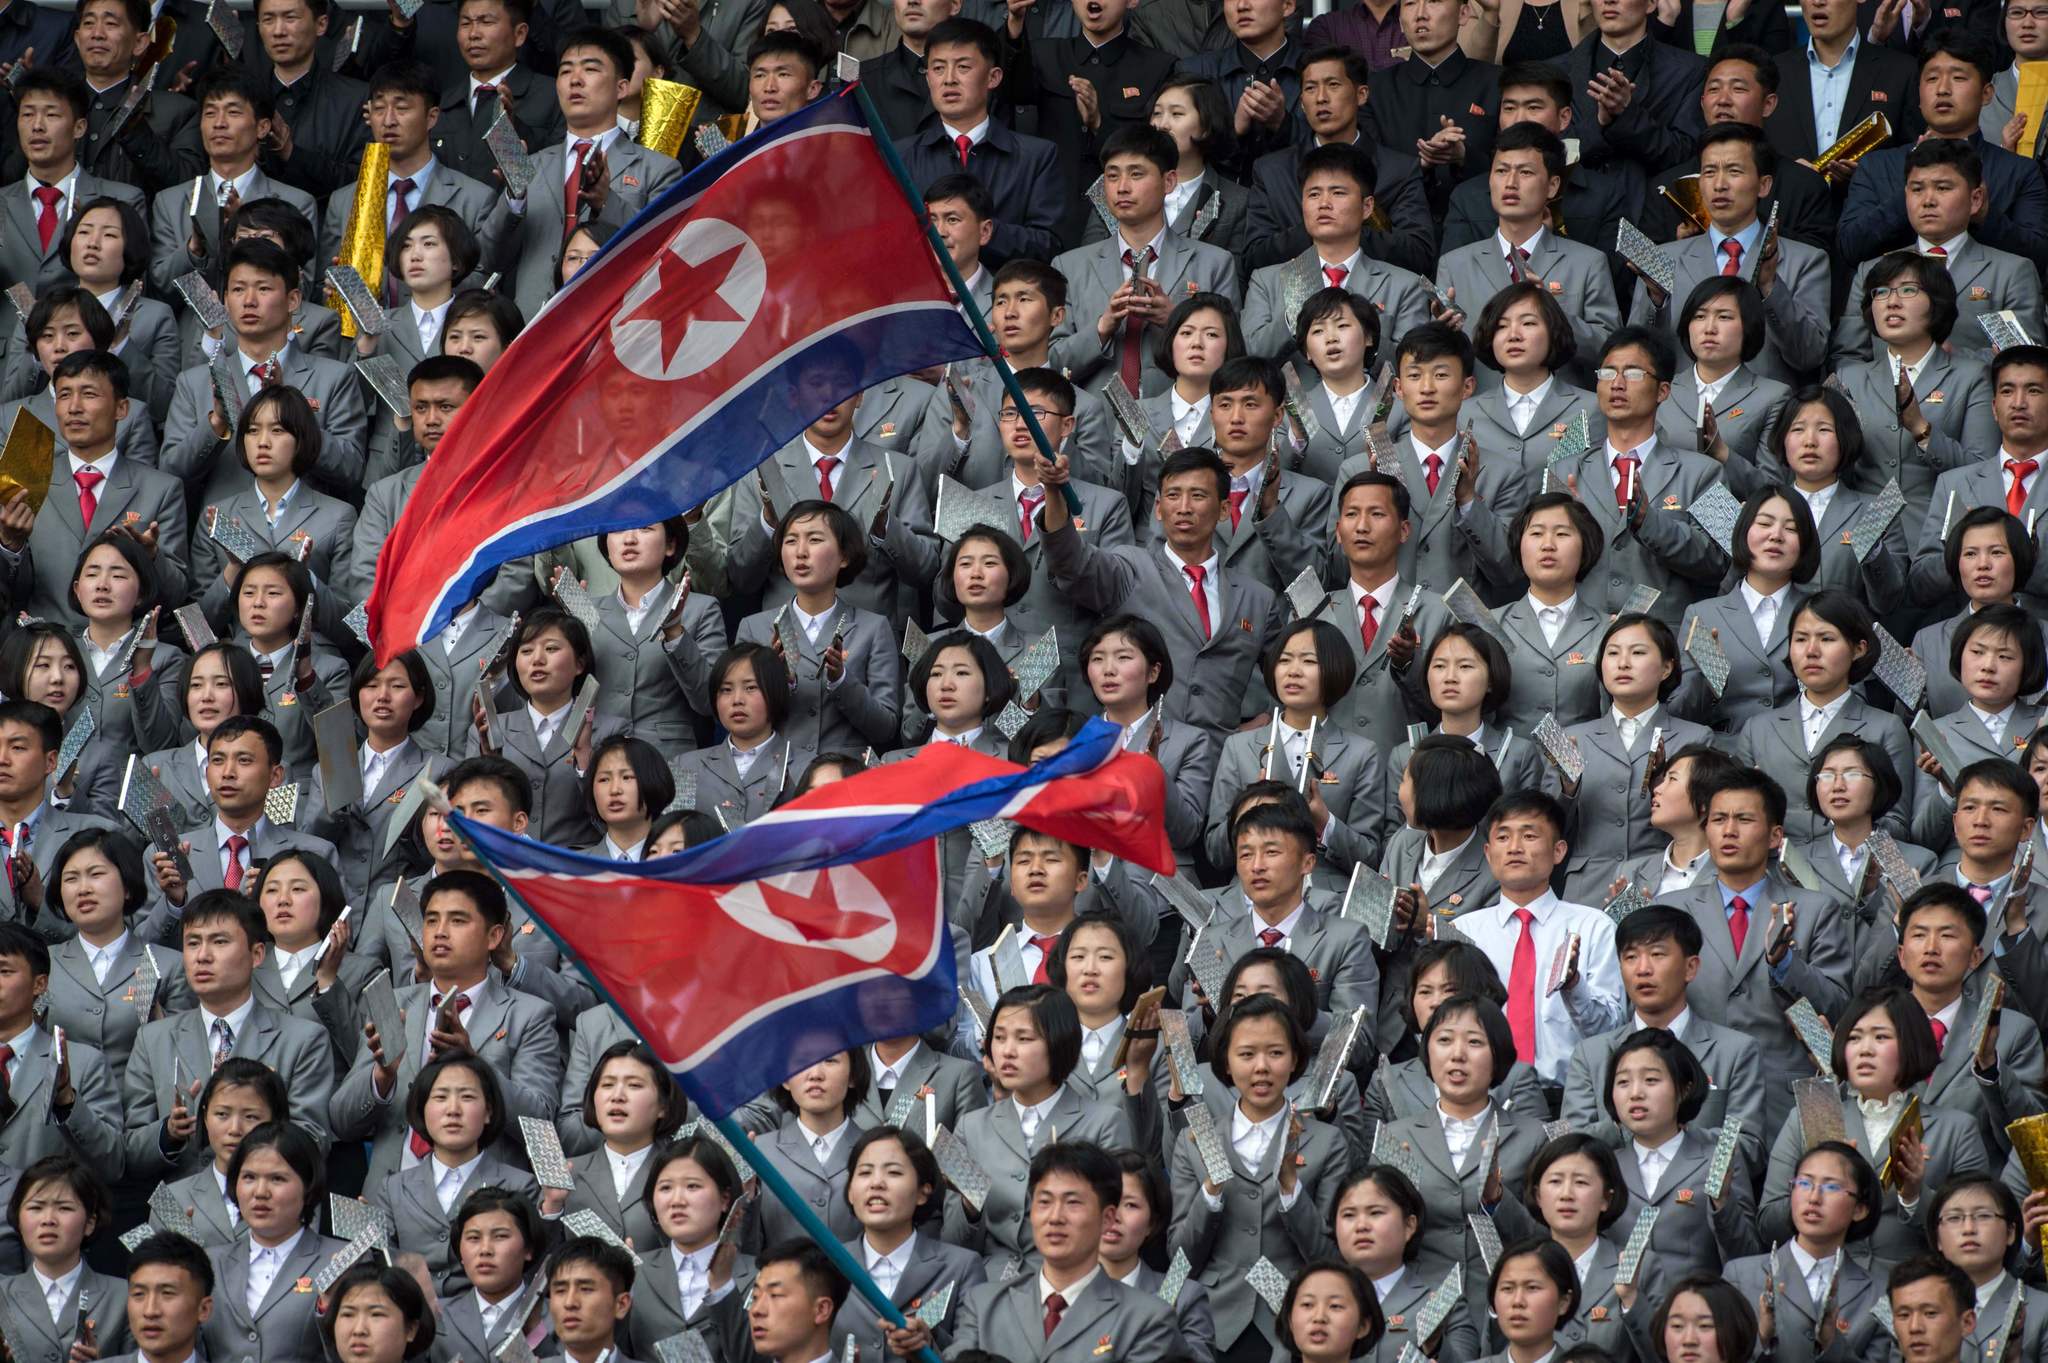 (FILES) In a file photo taken on April 7, 2017 <HIT>North</HIT><HIT>Korea</HIT> fans wave flags as they support their team against South <HIT>Korea</HIT> during their AFC Womens 2018 Asian Cup Group B qualifying football match at the Kim Il-Sung stadium in Pyongyang. - <HIT>North</HIT> and South <HIT>Korea</HIT> face each other in a World Cup qualifier on October 15, 2019 for their first ever competitive mens match in Pyongyang, while talks on the <HIT>North</HIT>s nuclear arsenal remain deadlocked. (Photo by KIM WON-JIN / AFP) / TO GO WITH AFP STORY NKOREA-SKOREA-DIPLOMACY-FBL-KOR-PRK,ADVANCER BY SUNGHEE HWANG